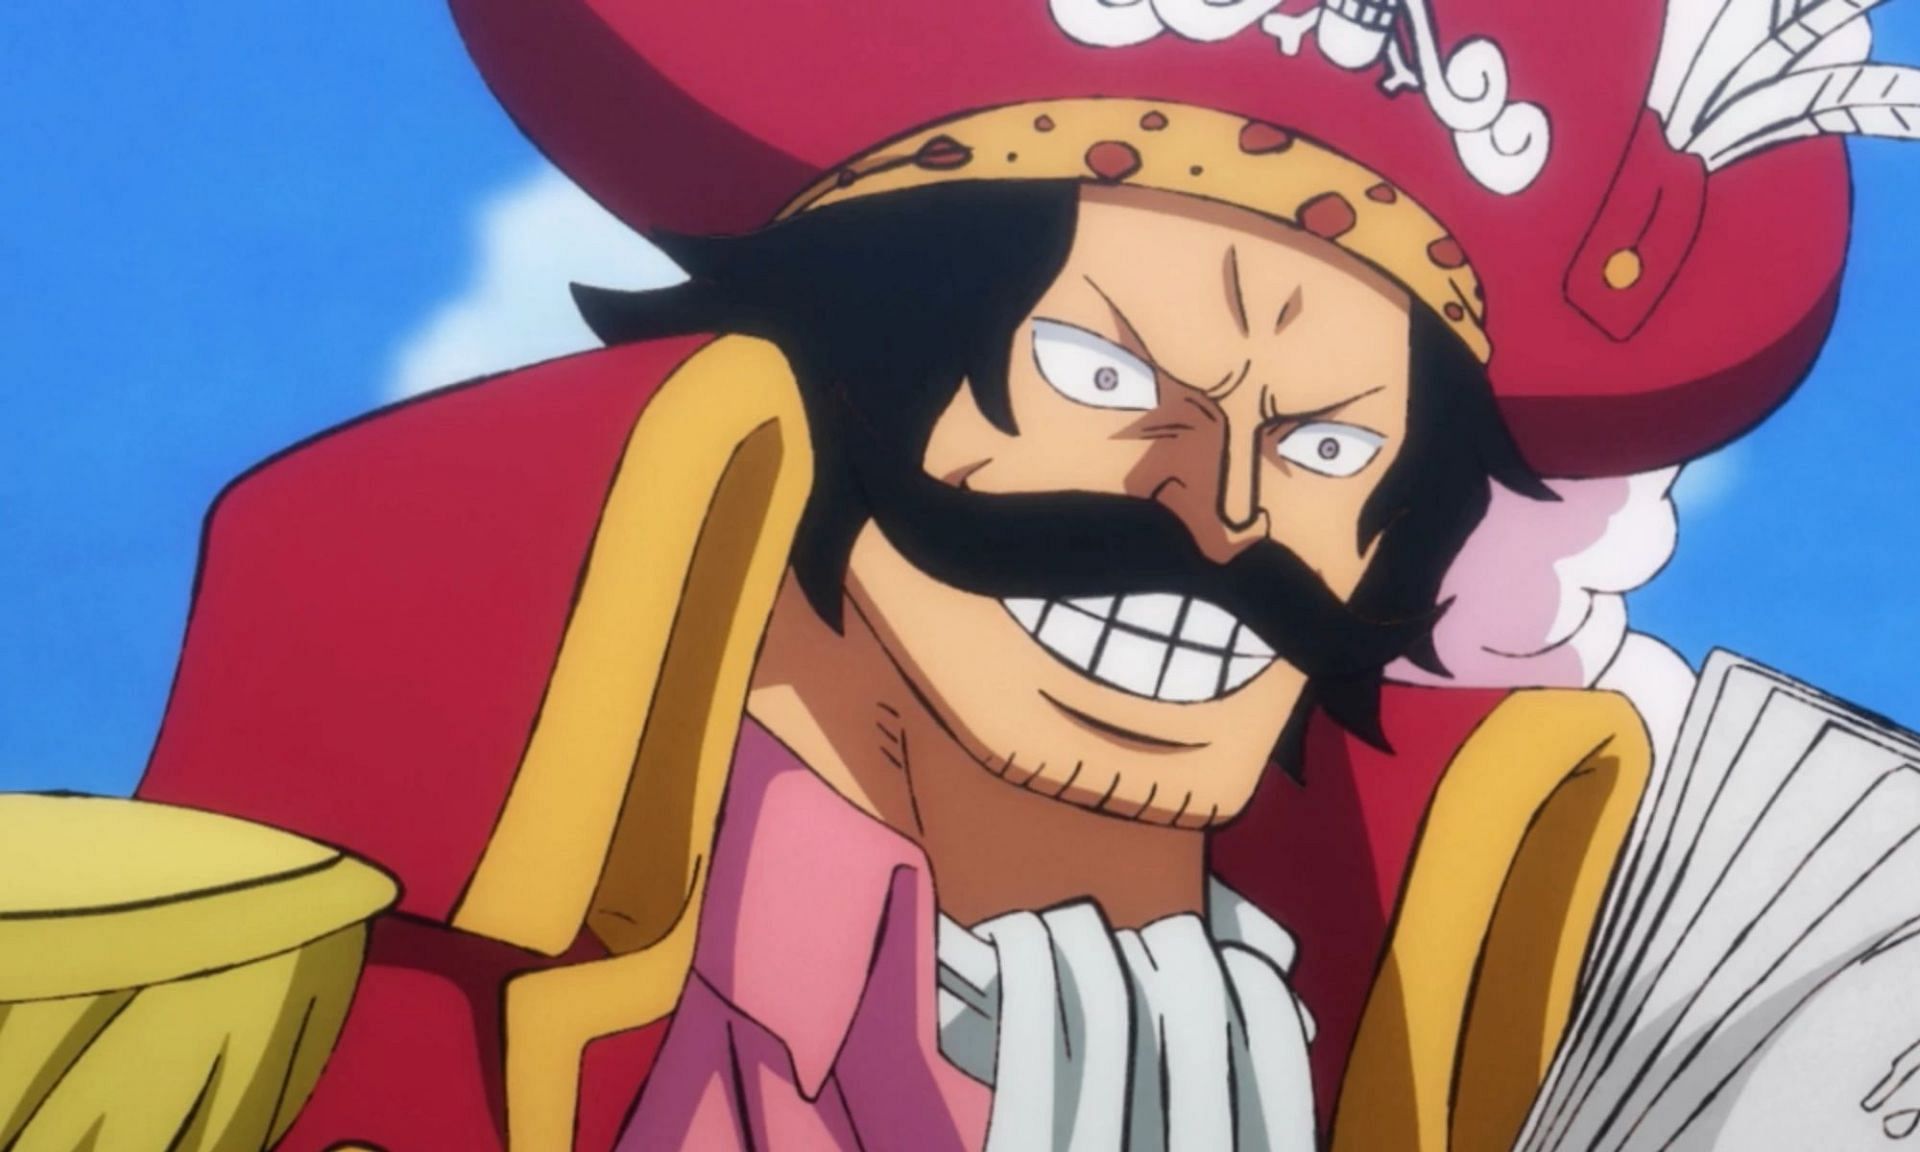 Only Eiichiro Oda knows what Roger saw in Laugh Tale (Image via Toei Animation)